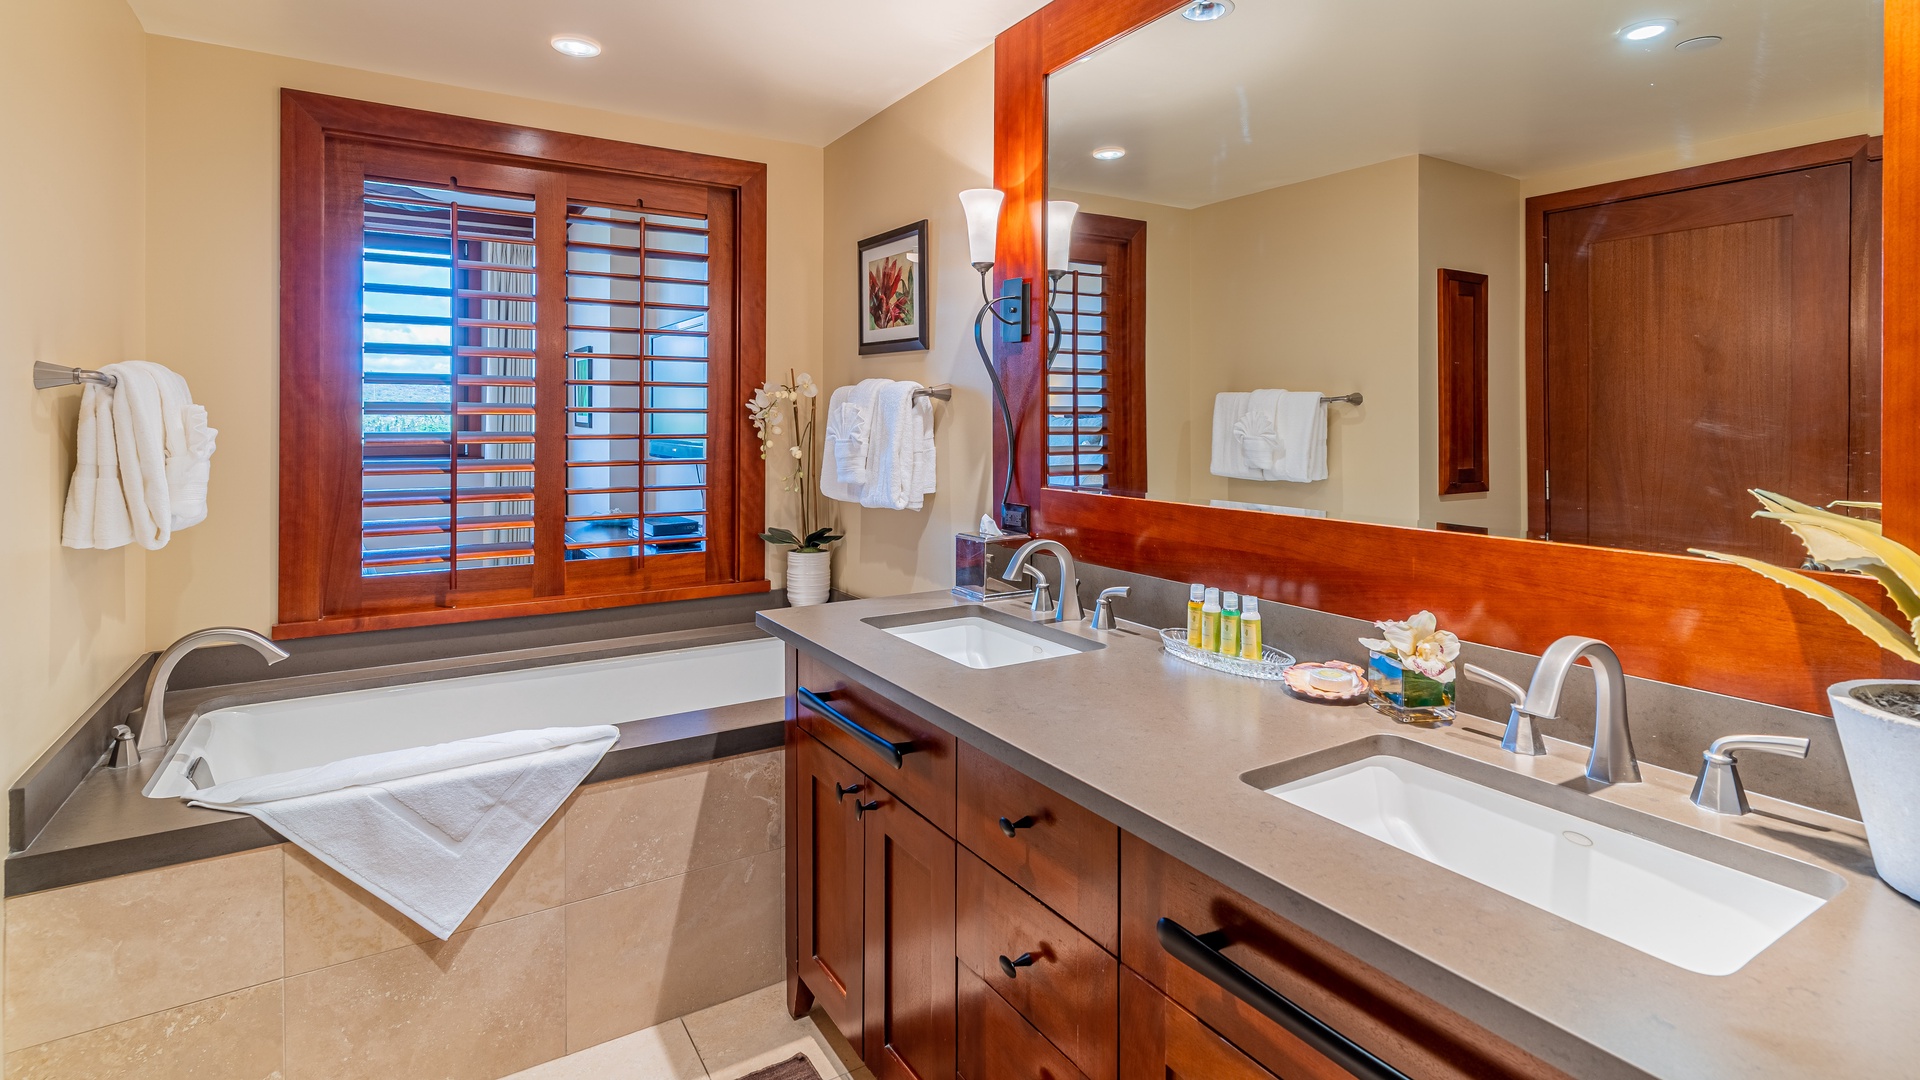 Kapolei Vacation Rentals, Ko Olina Beach Villas O704 - The primary guest bathroom has a double vanity and luxurious soaking tub.